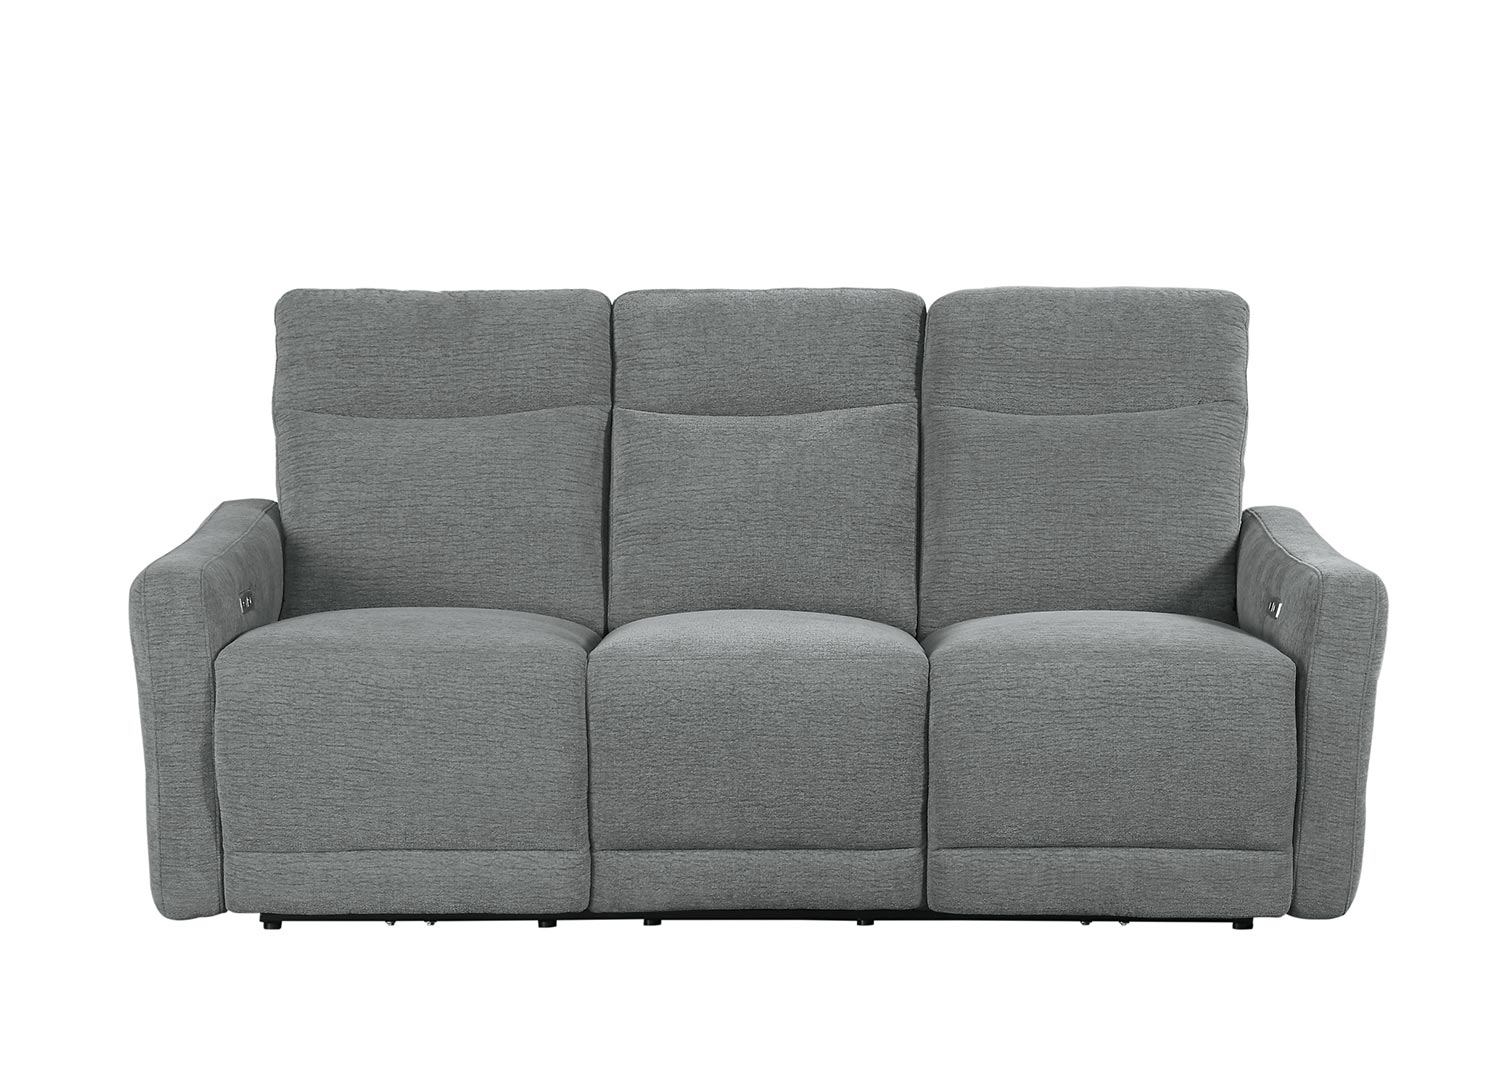 Homelegance Edition Power Double Lay Flat Reclining Sofa with Power Headrests - Dove